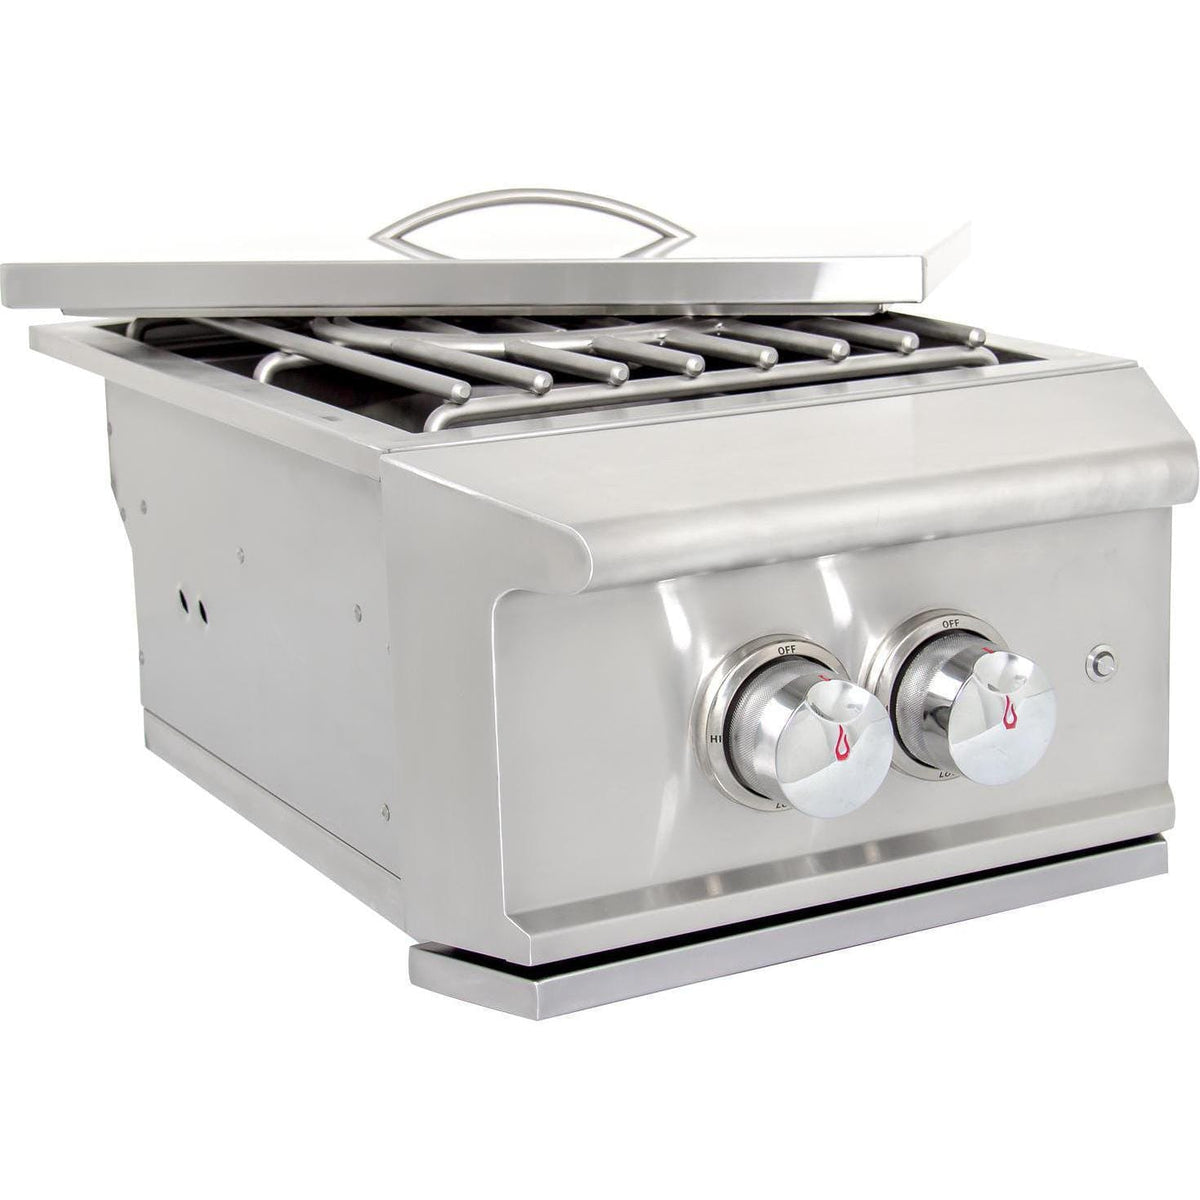 Blaze Professional 16 Inch Power Burner Angled View With Stainless Steel Lid